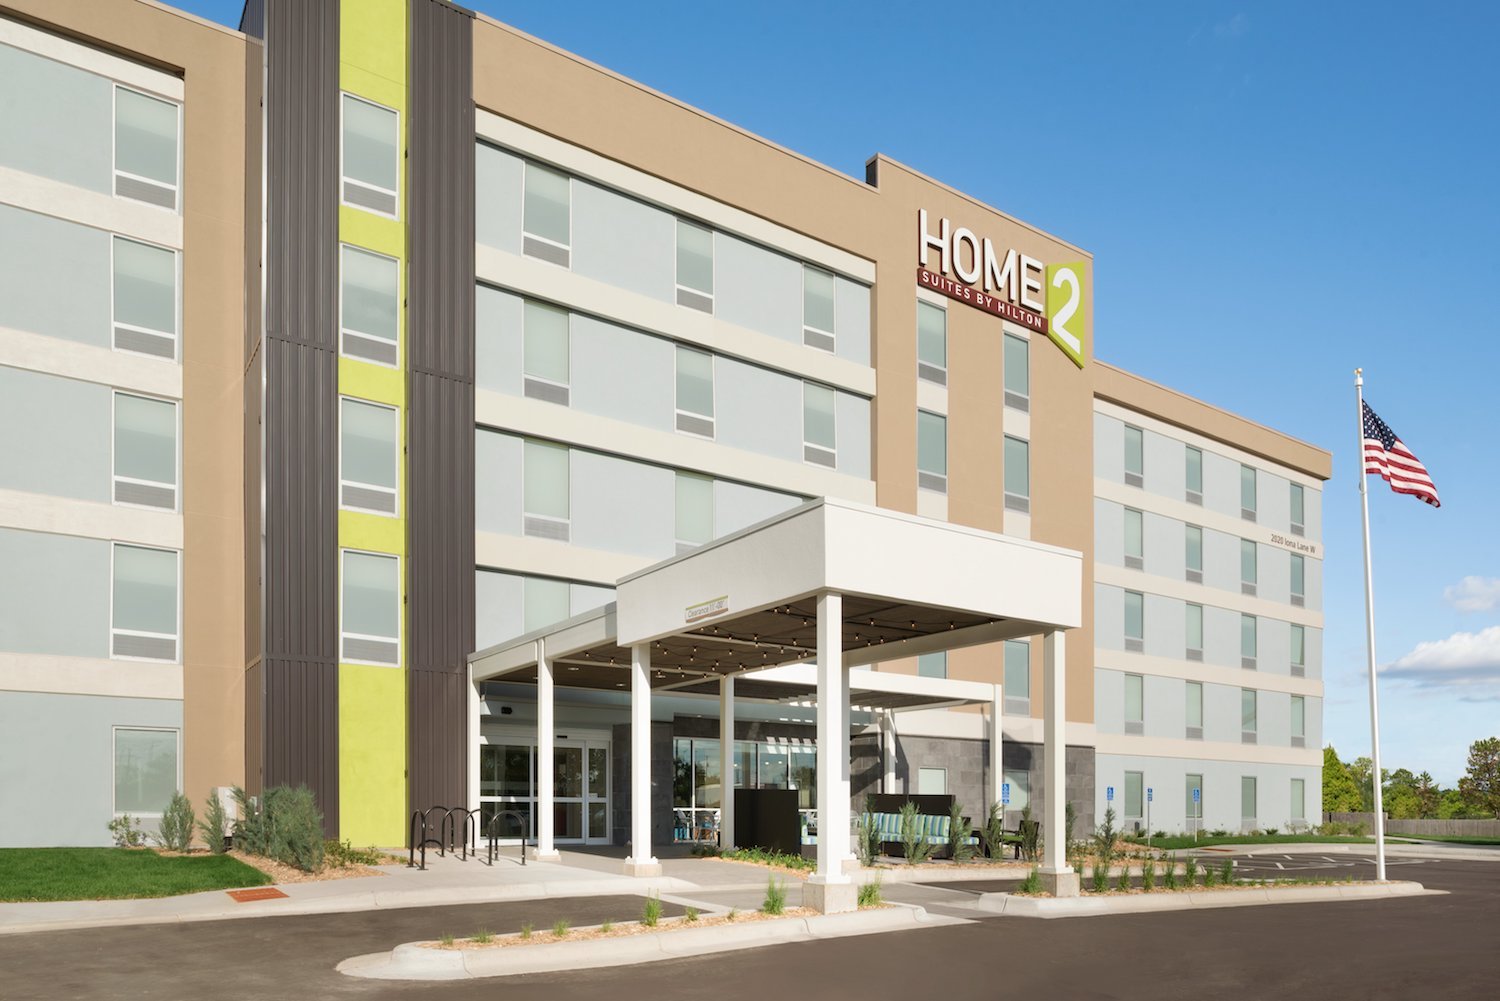 Photo of Home2 Suites by Hilton Roseville Minneapolis, Roseville, MN